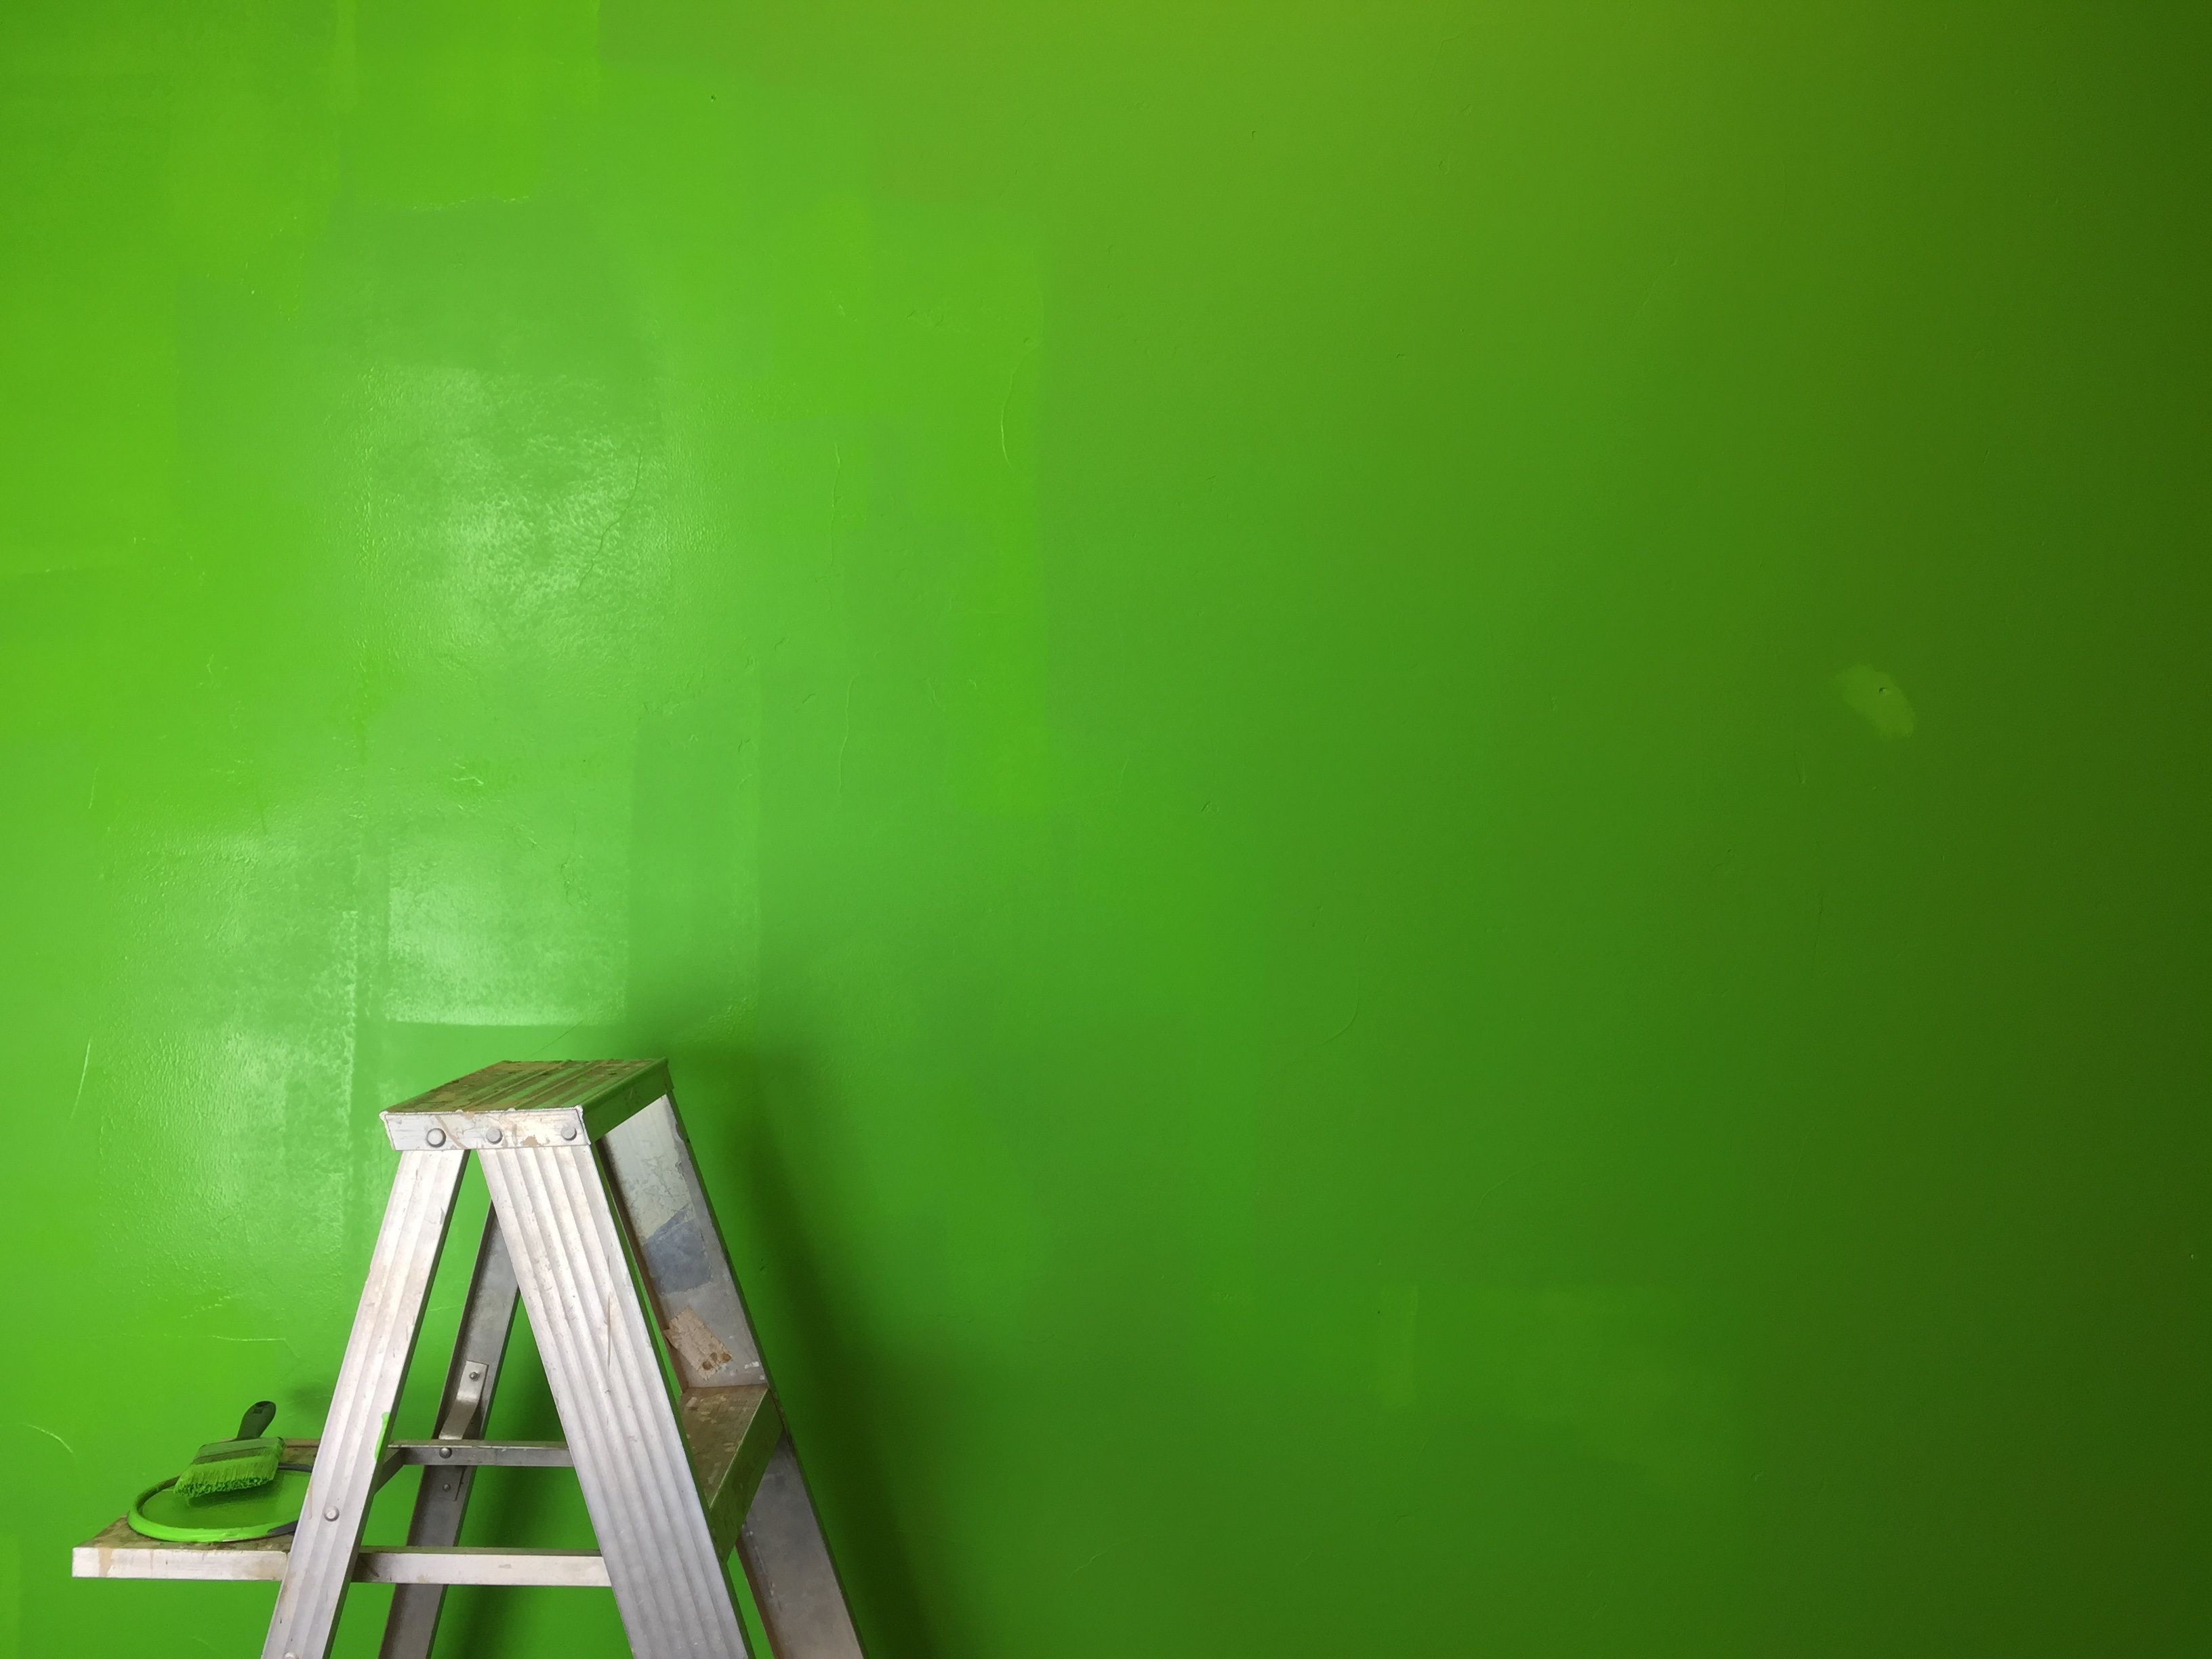 Ladder by painted green screen wall